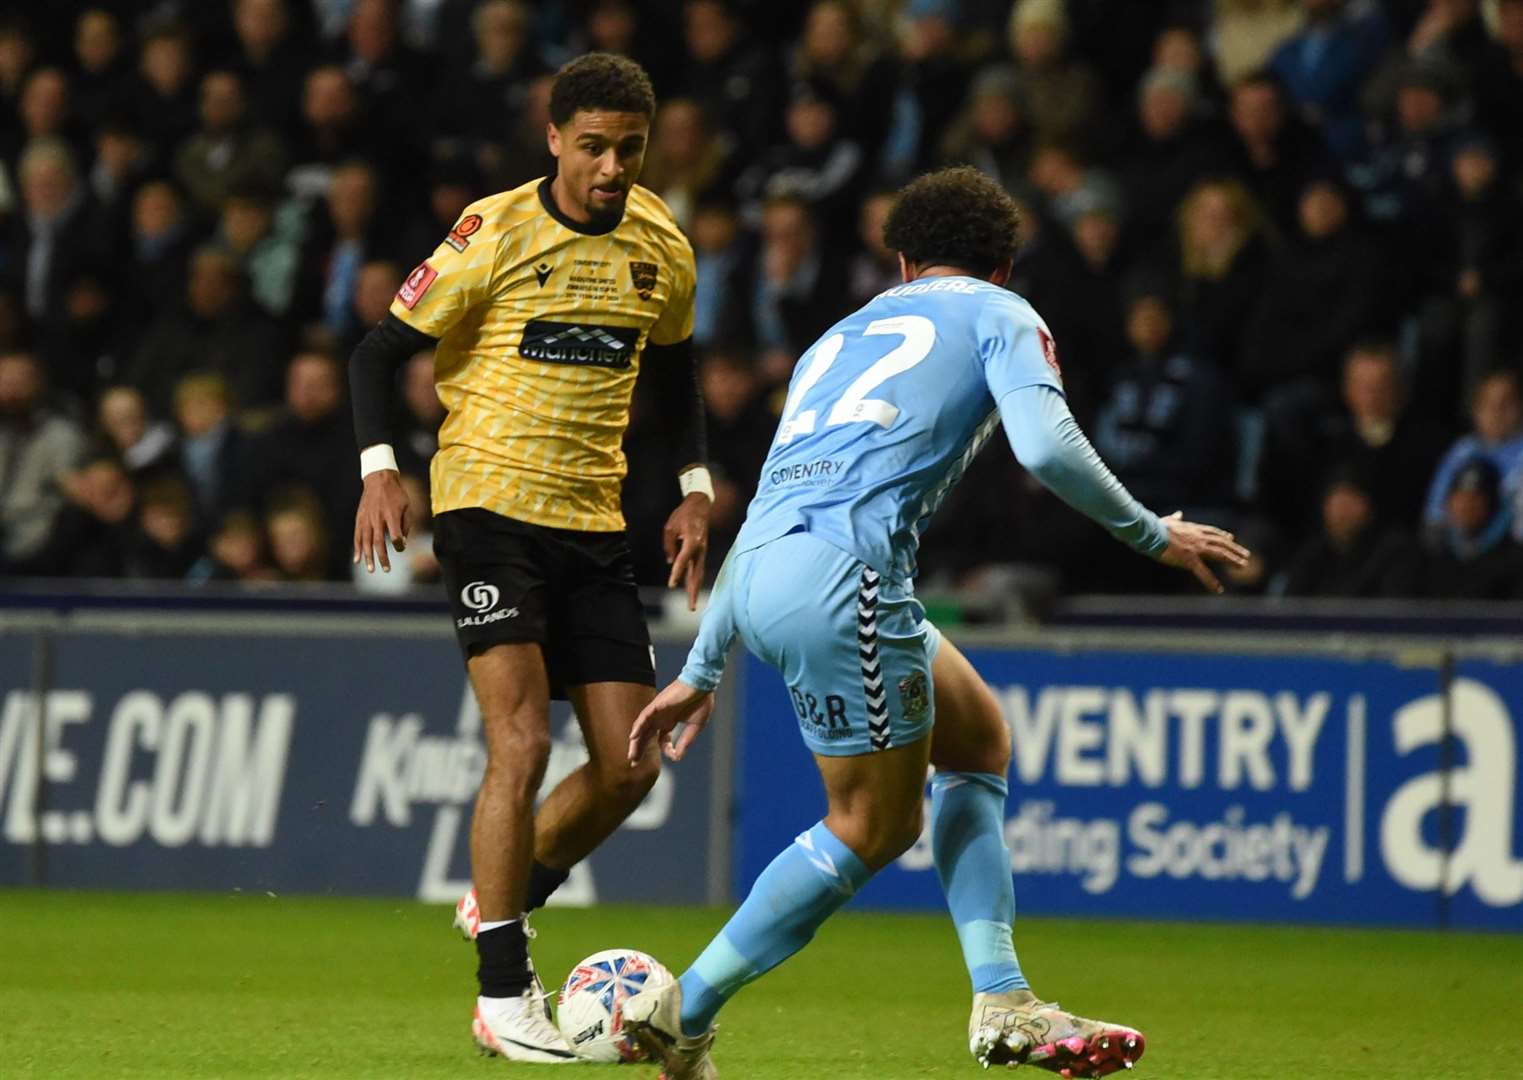 Liam Sole in action for Maidstone during their FA Cup fifth-round tie at Coventry. Picture: Helen Cooper